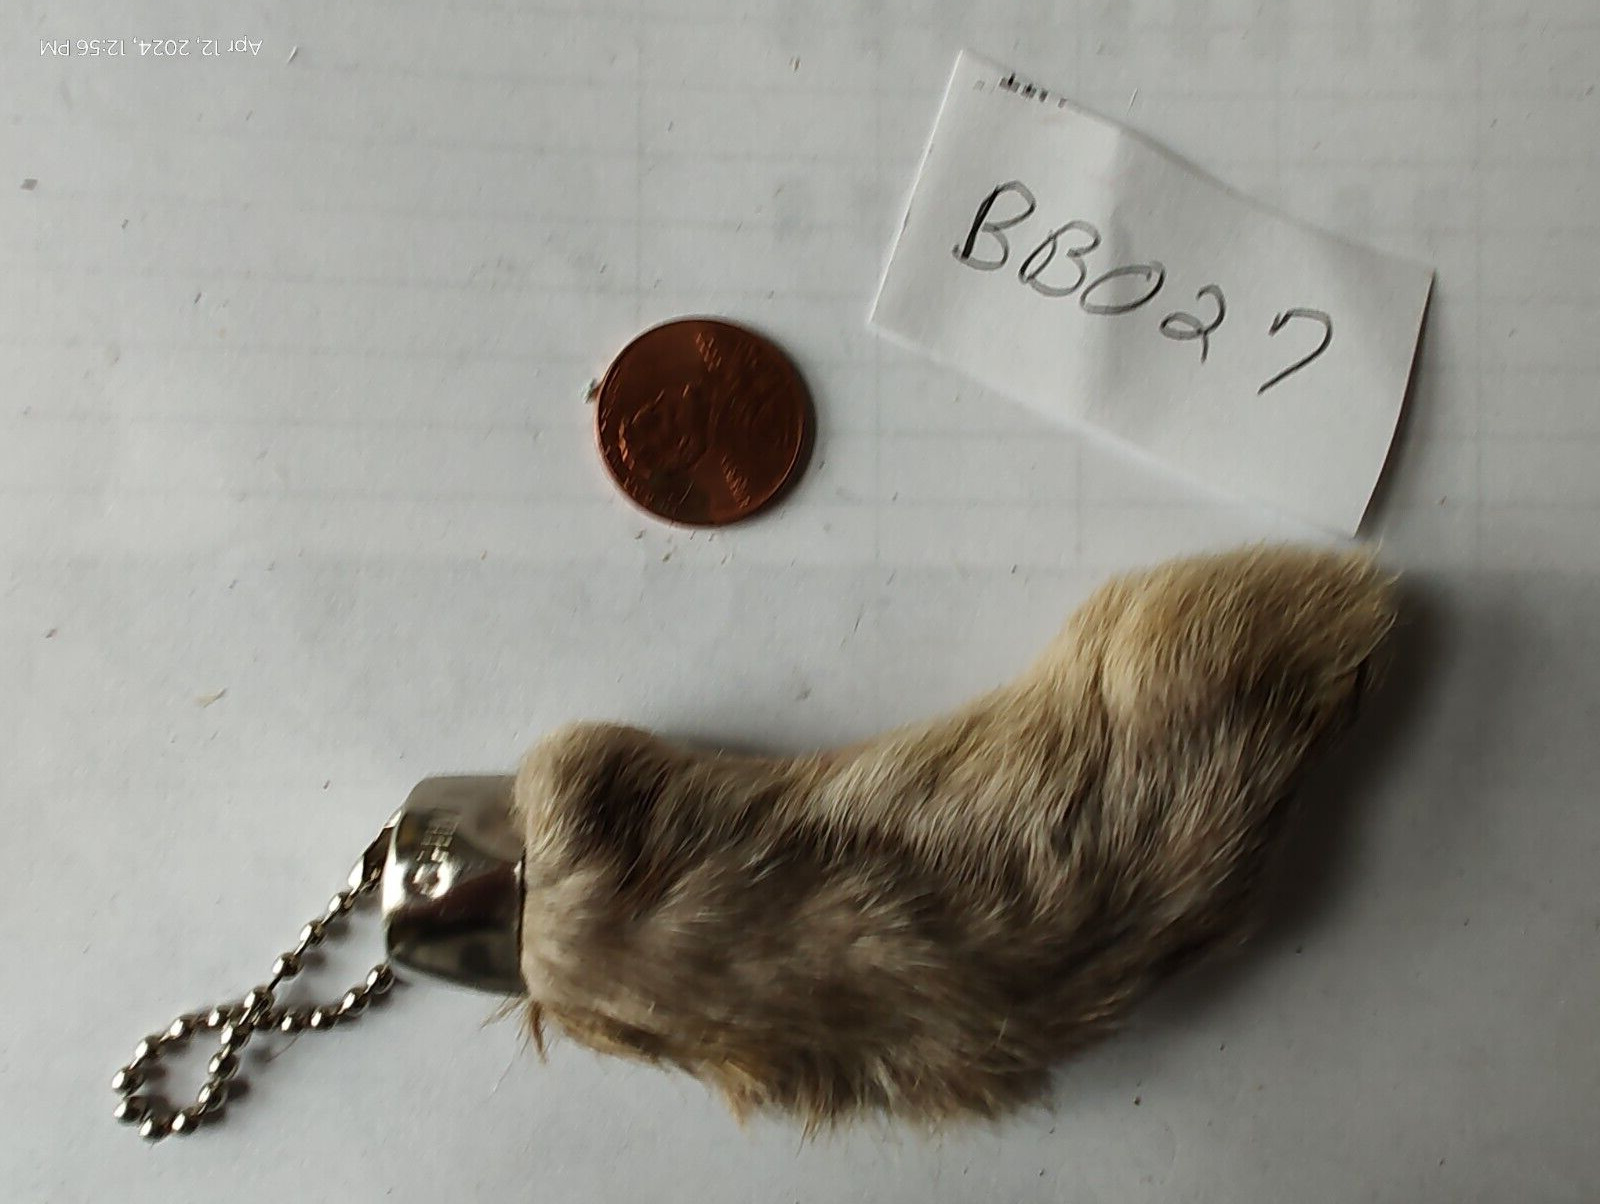 Real Natural Lucky Rabbit Foot Keychain with nails multi color Brown greys Bunny